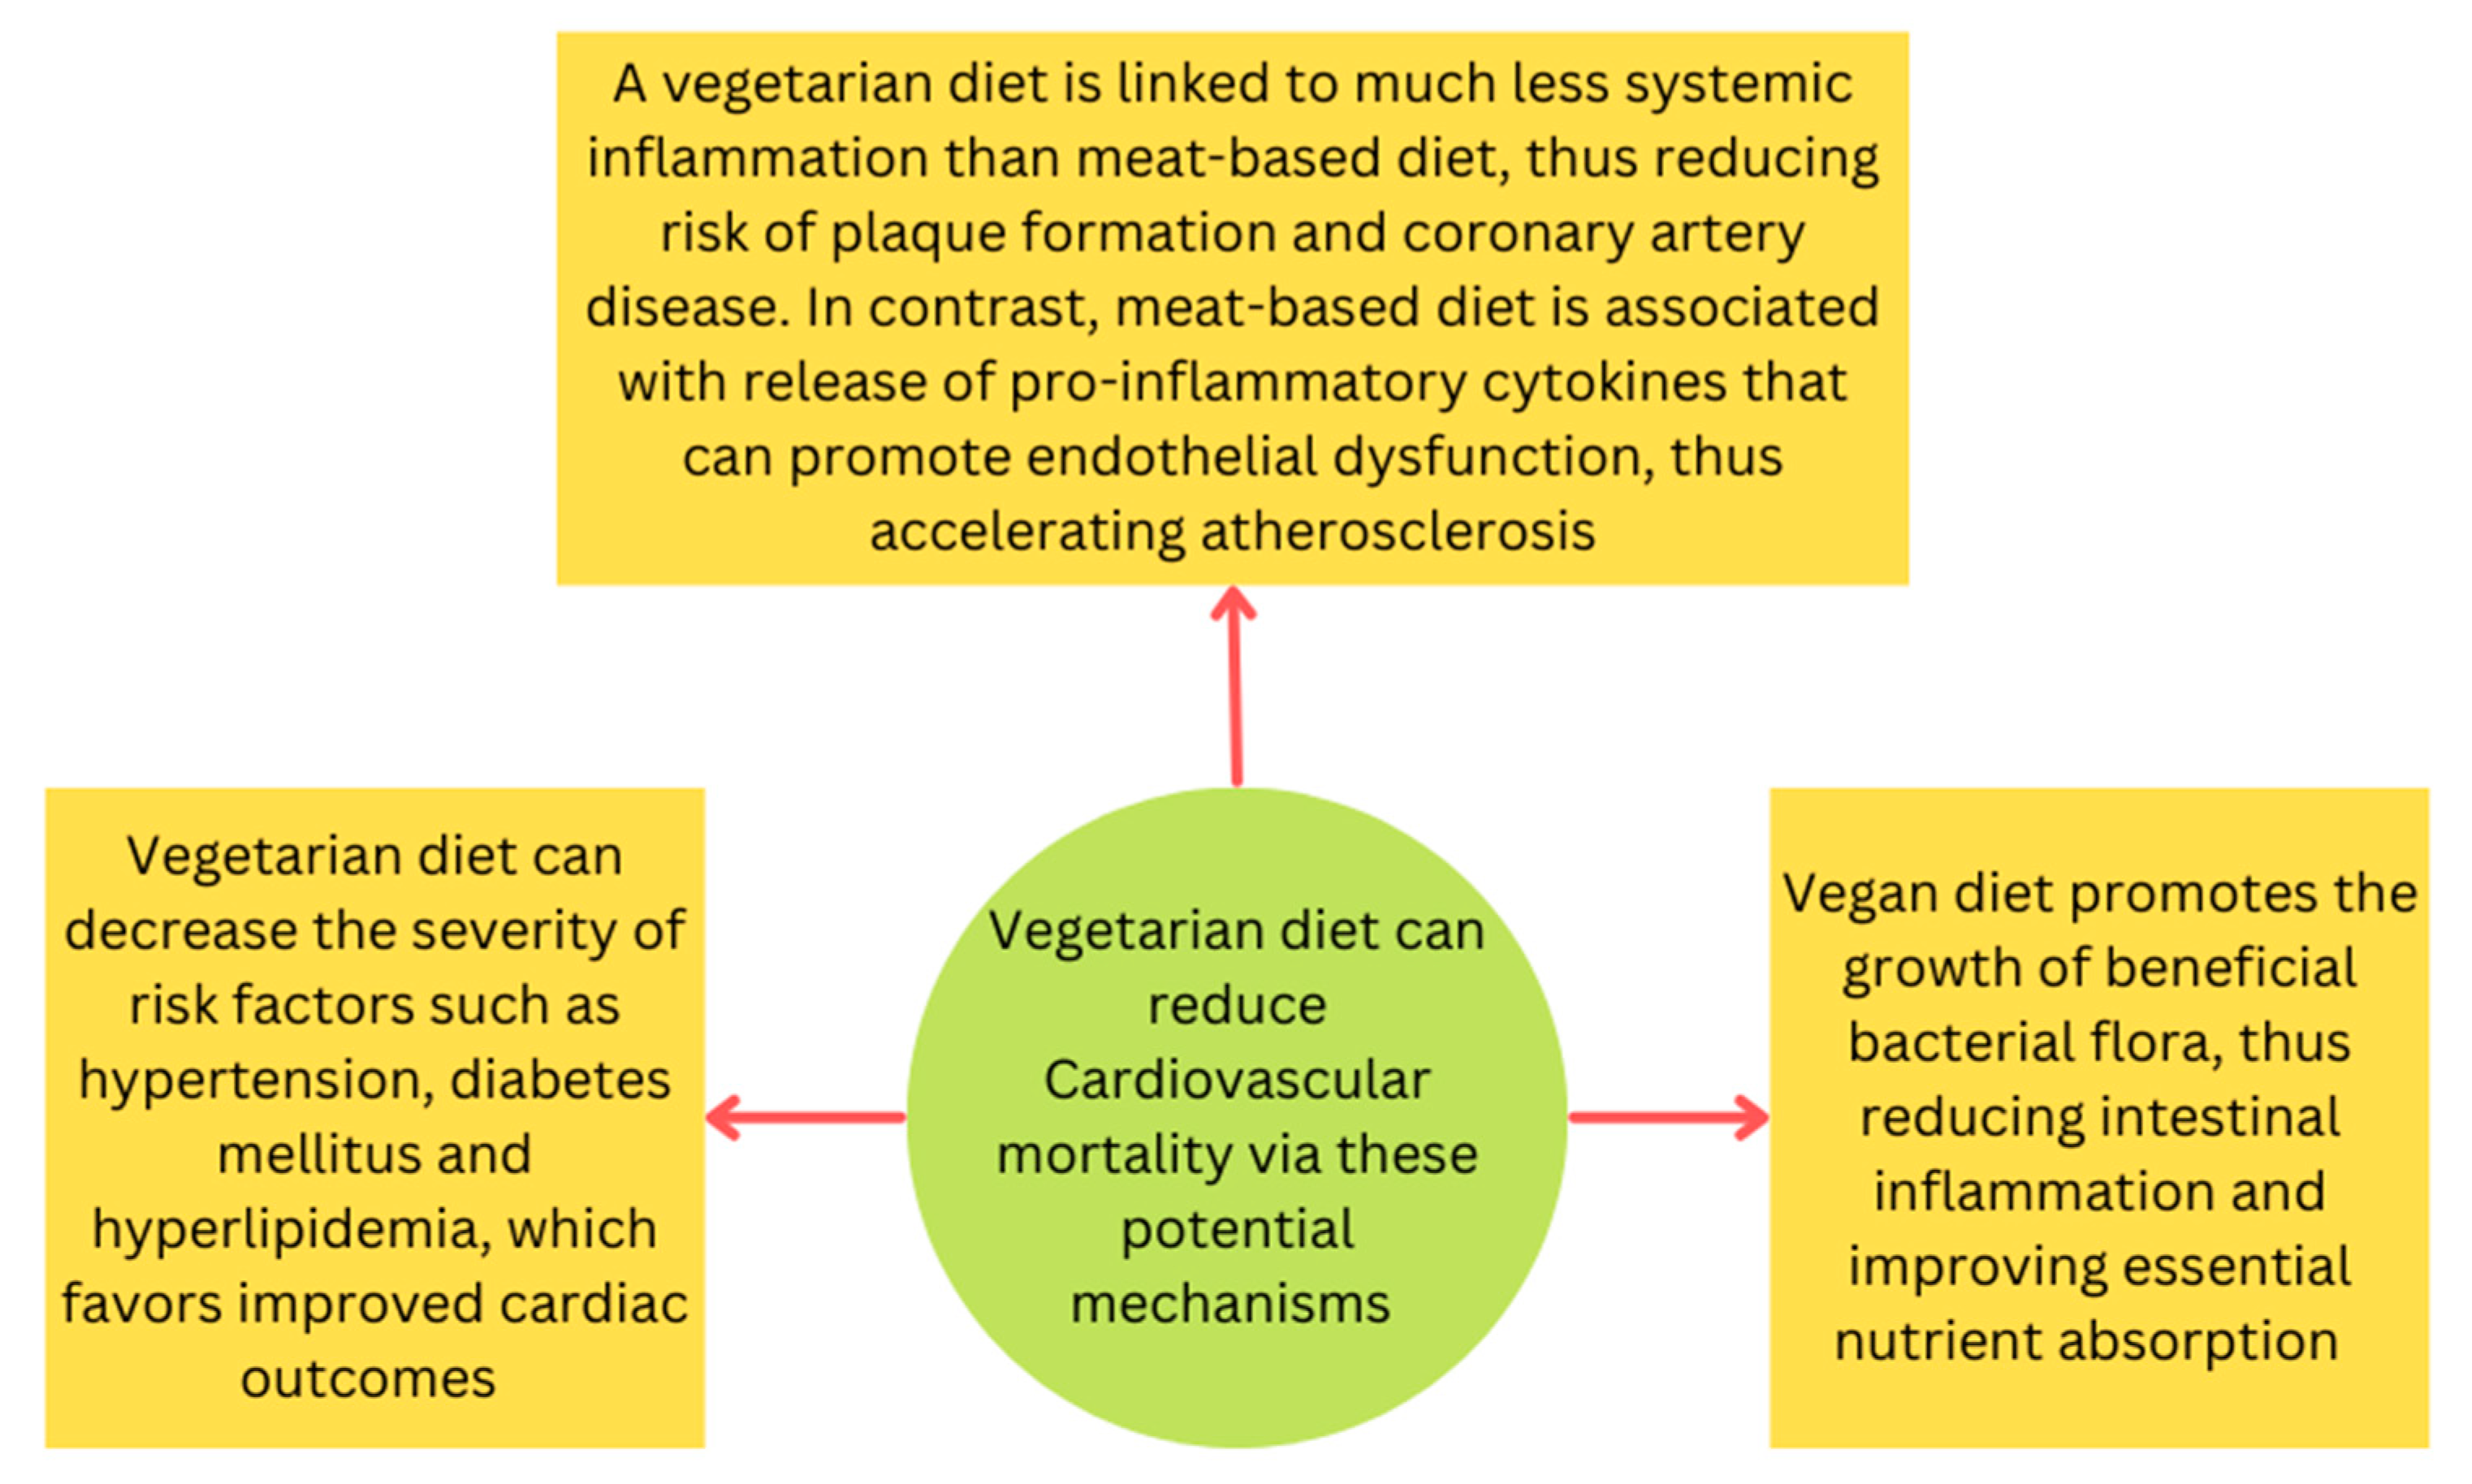 I. Introduction to Veganism and Cardiovascular Disease